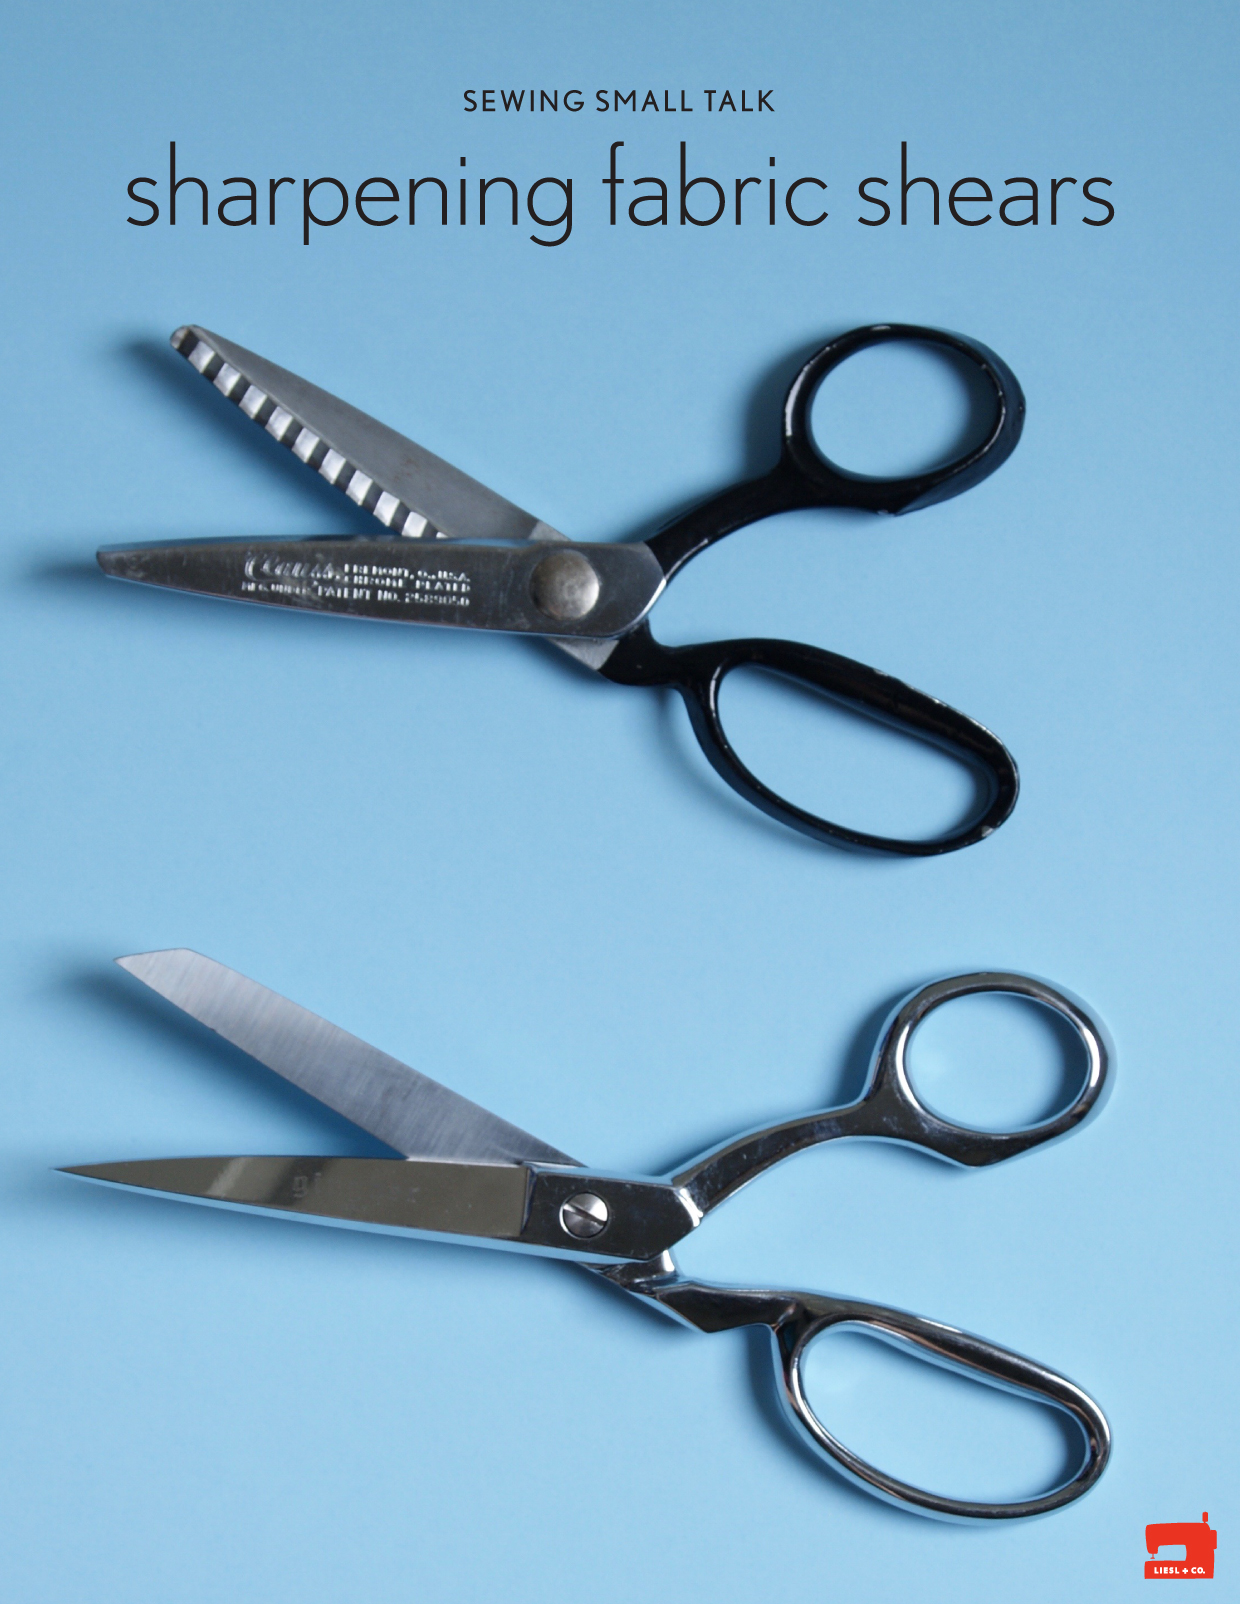 Sewing Small Talk: Sharpening Fabric Shears | Blog | Oliver + S